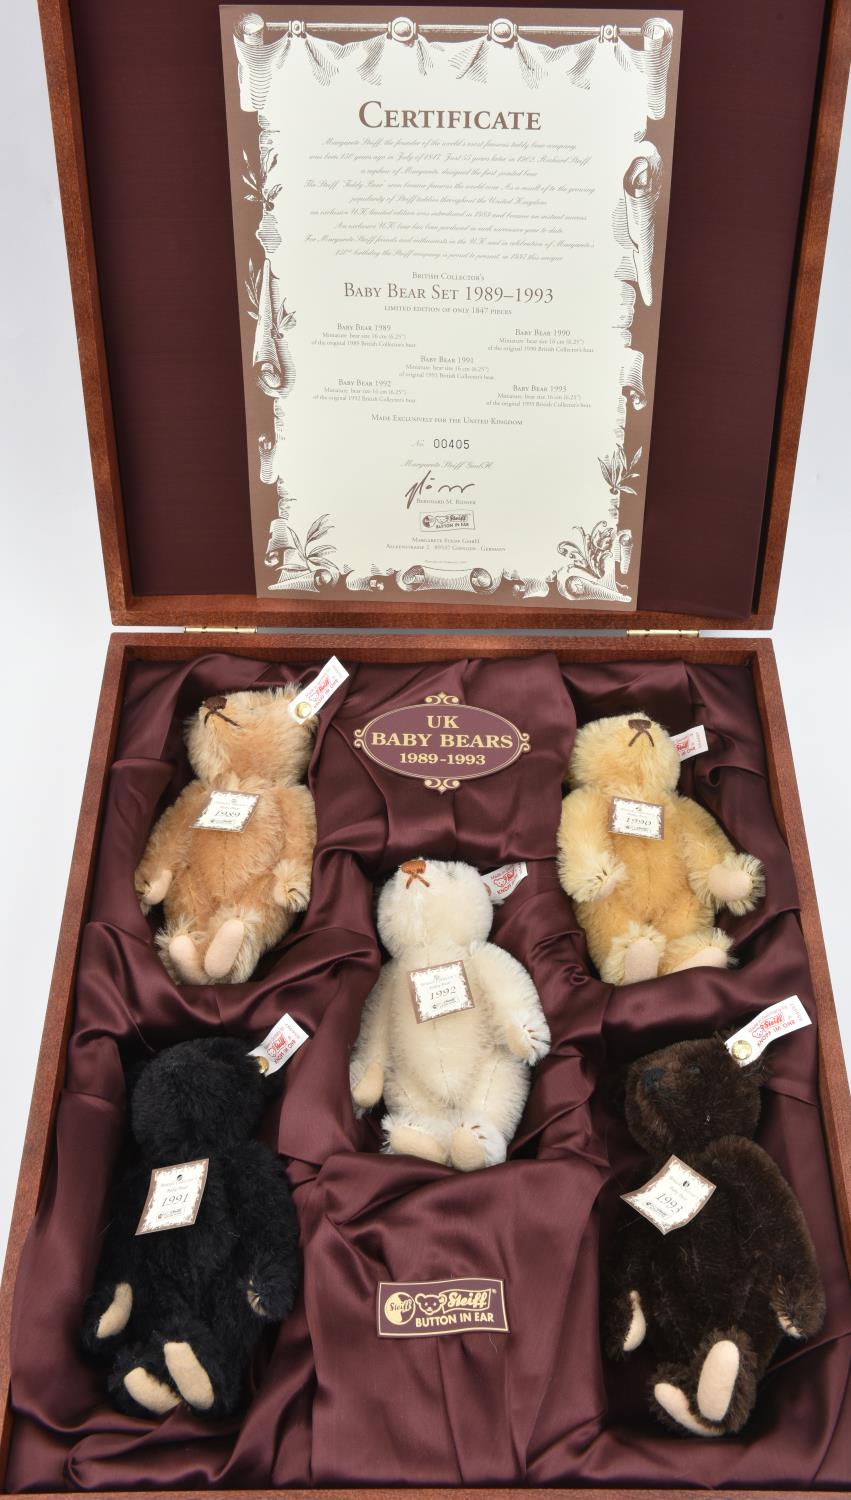 2 Steiff sets. A 1997 British Collector's wooden boxed set of 5 Steiff U.K. Baby Bears 1989-1993.